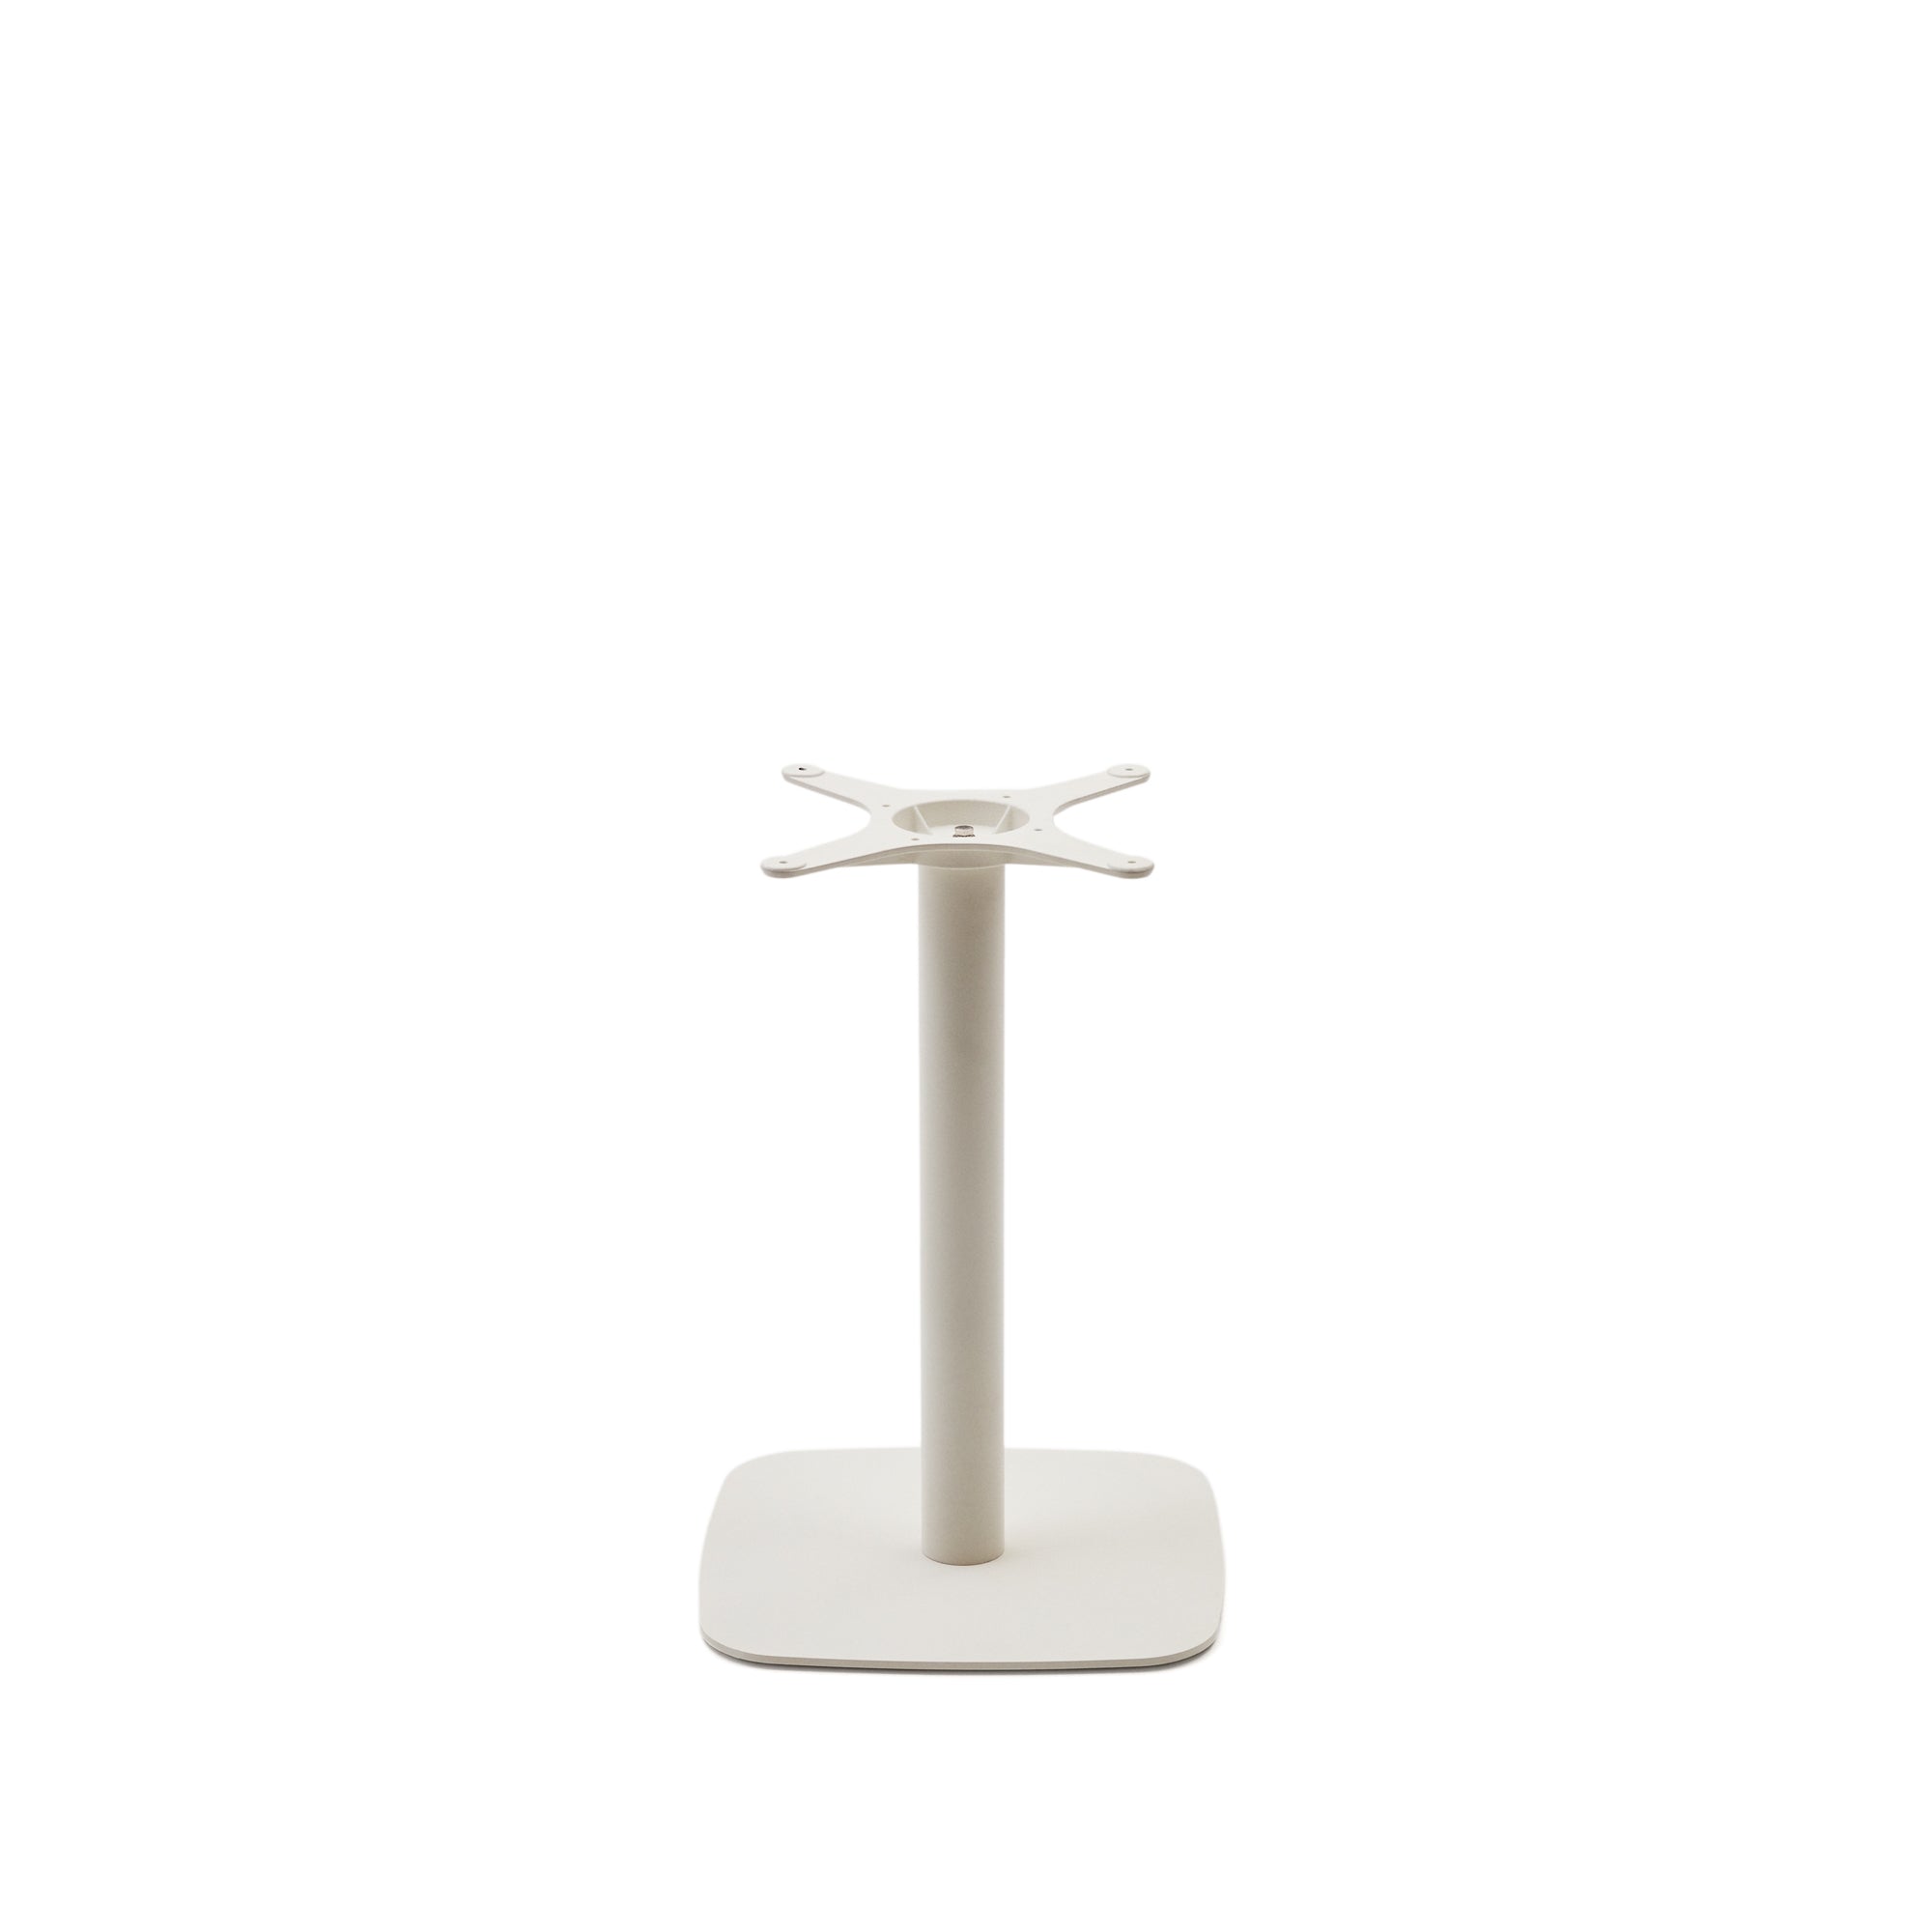 Dina bar-table leg with square metal base in a painted white finish